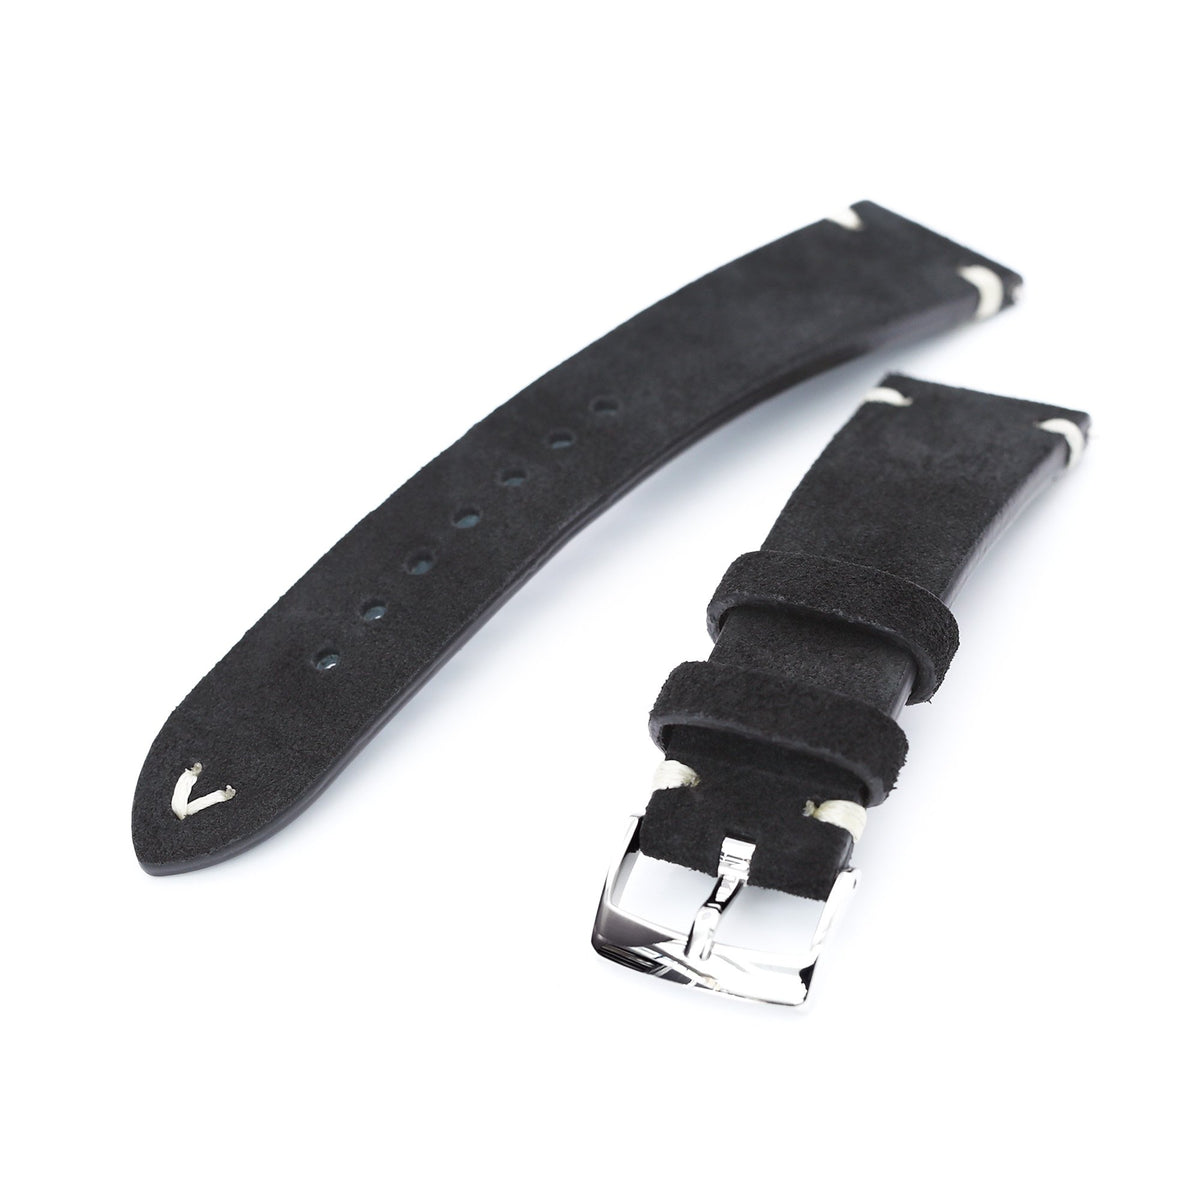 22mm Black Quick Release Italian Suede Leather Watch Strap Beige St. Strapcode Watch Bands